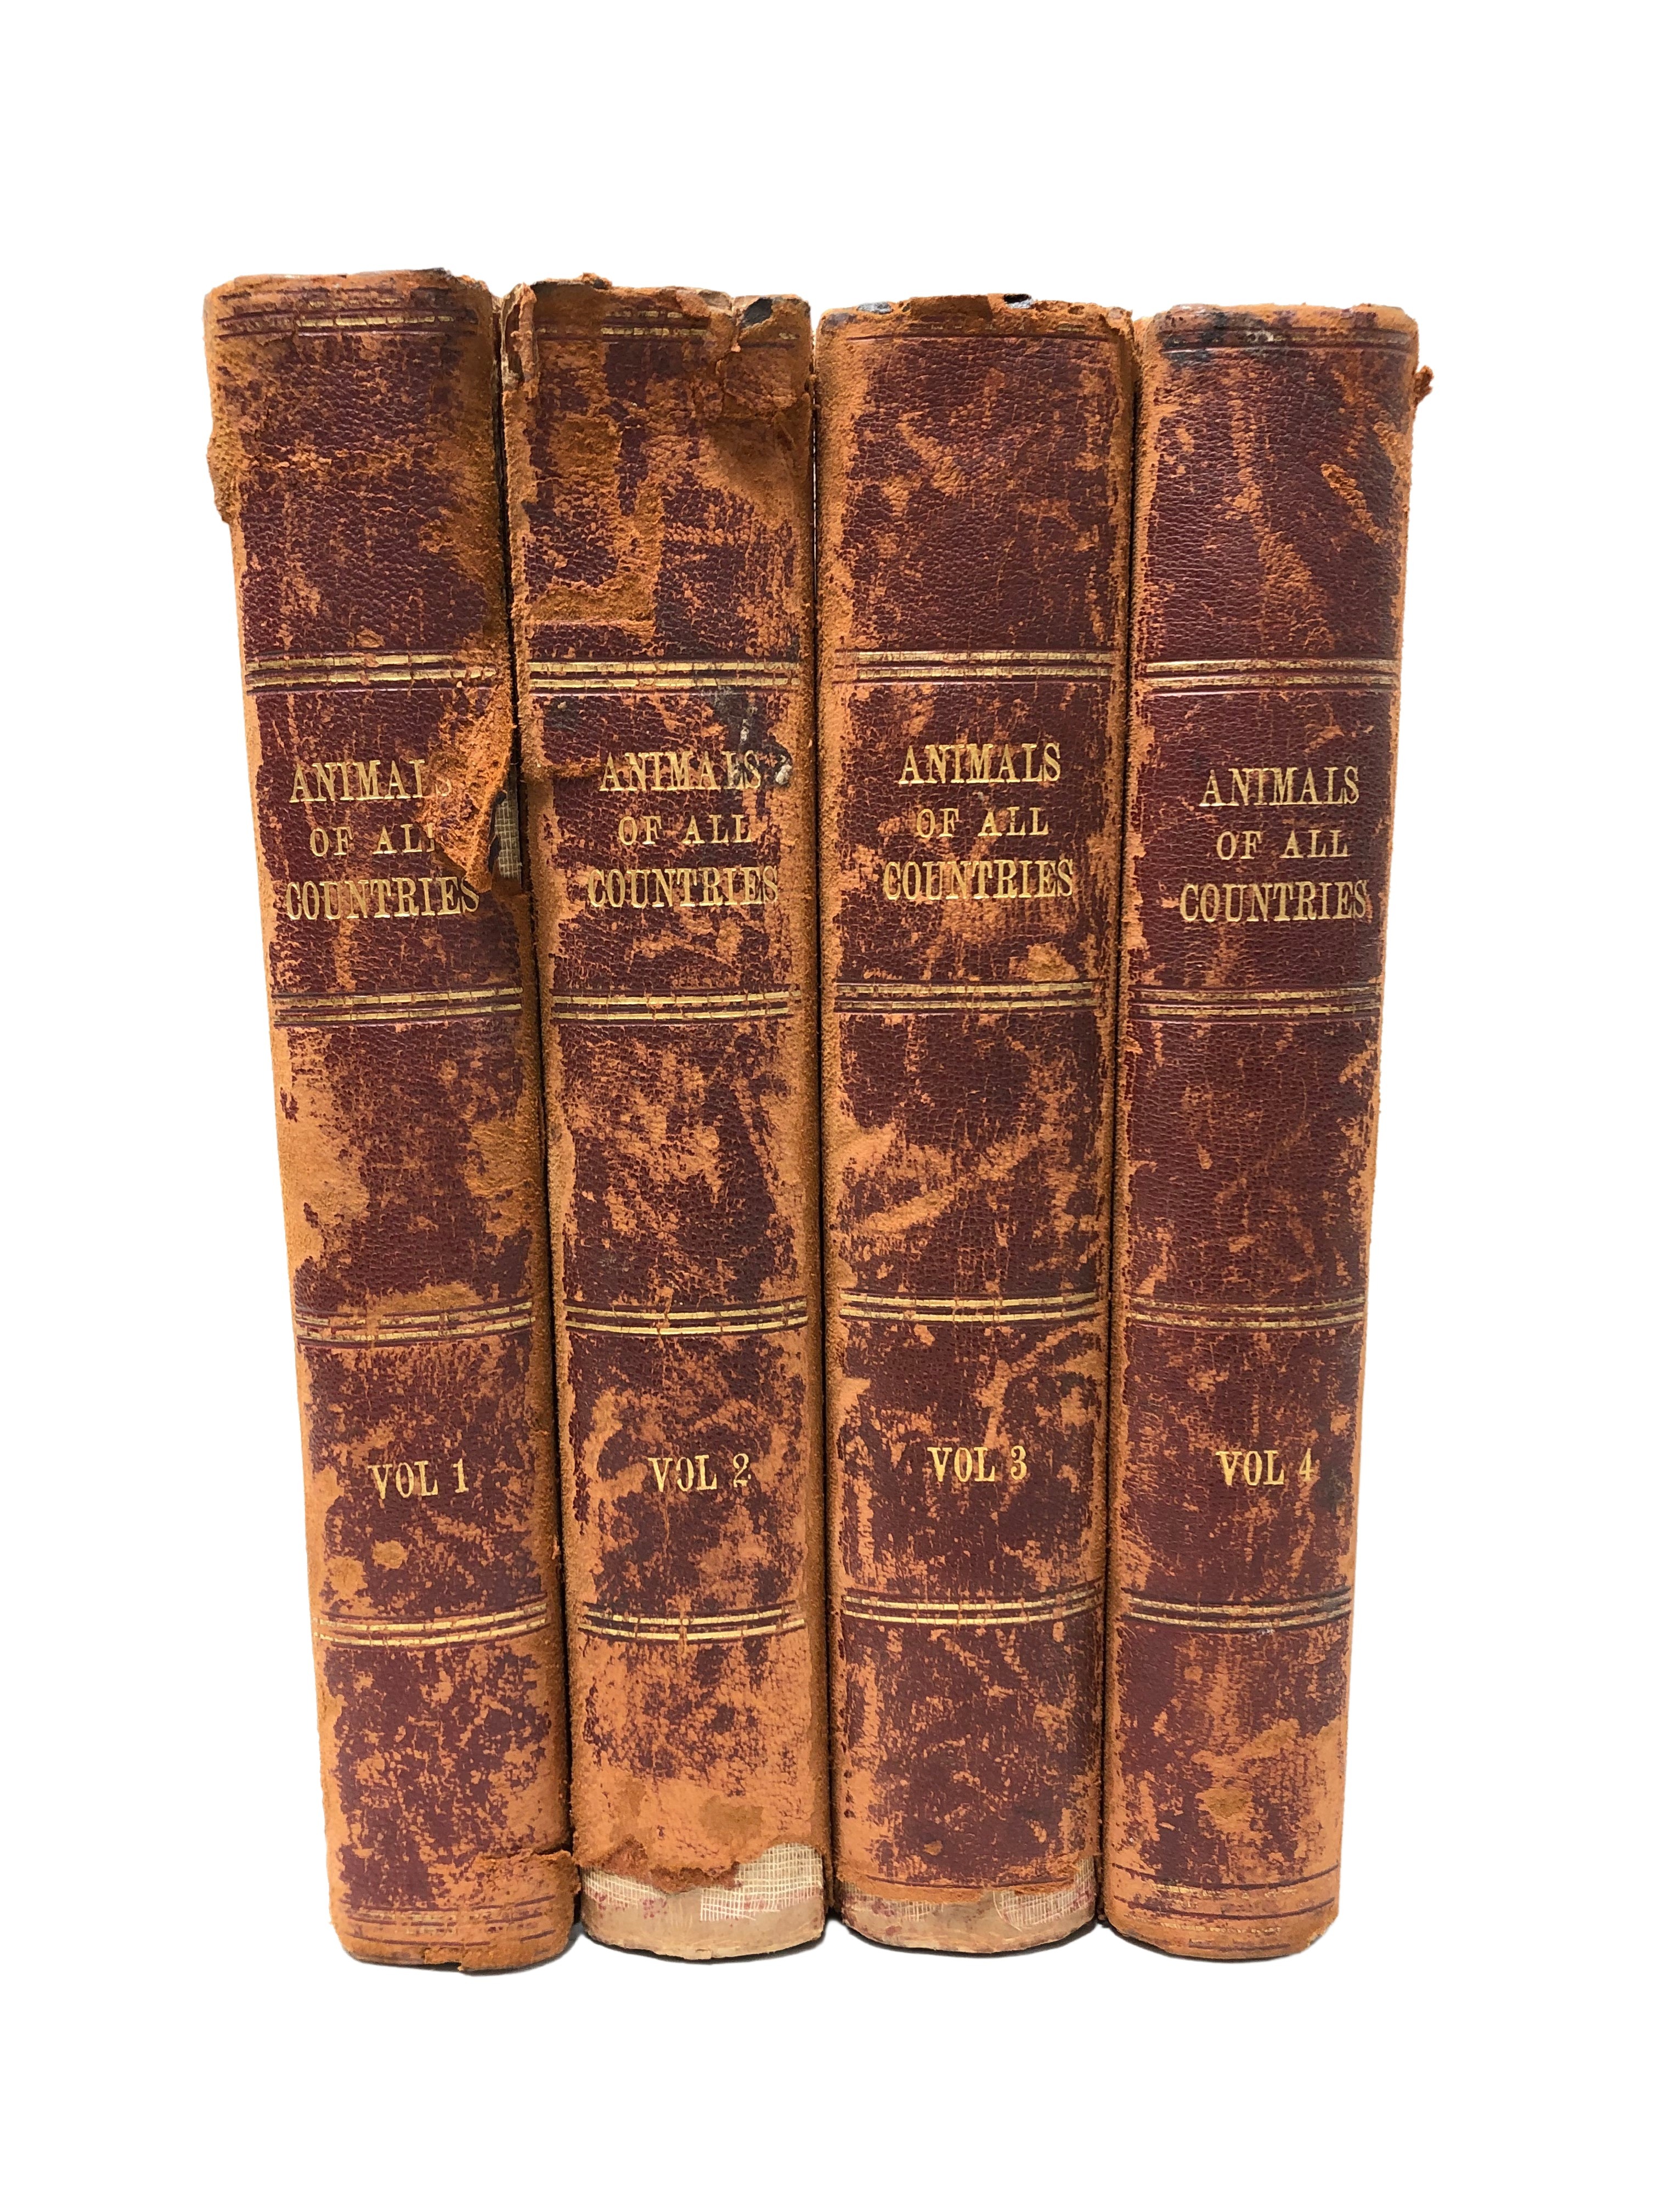 Hutchinson & Co (Publisher) : Animals of All Countries, a set of four volumes.